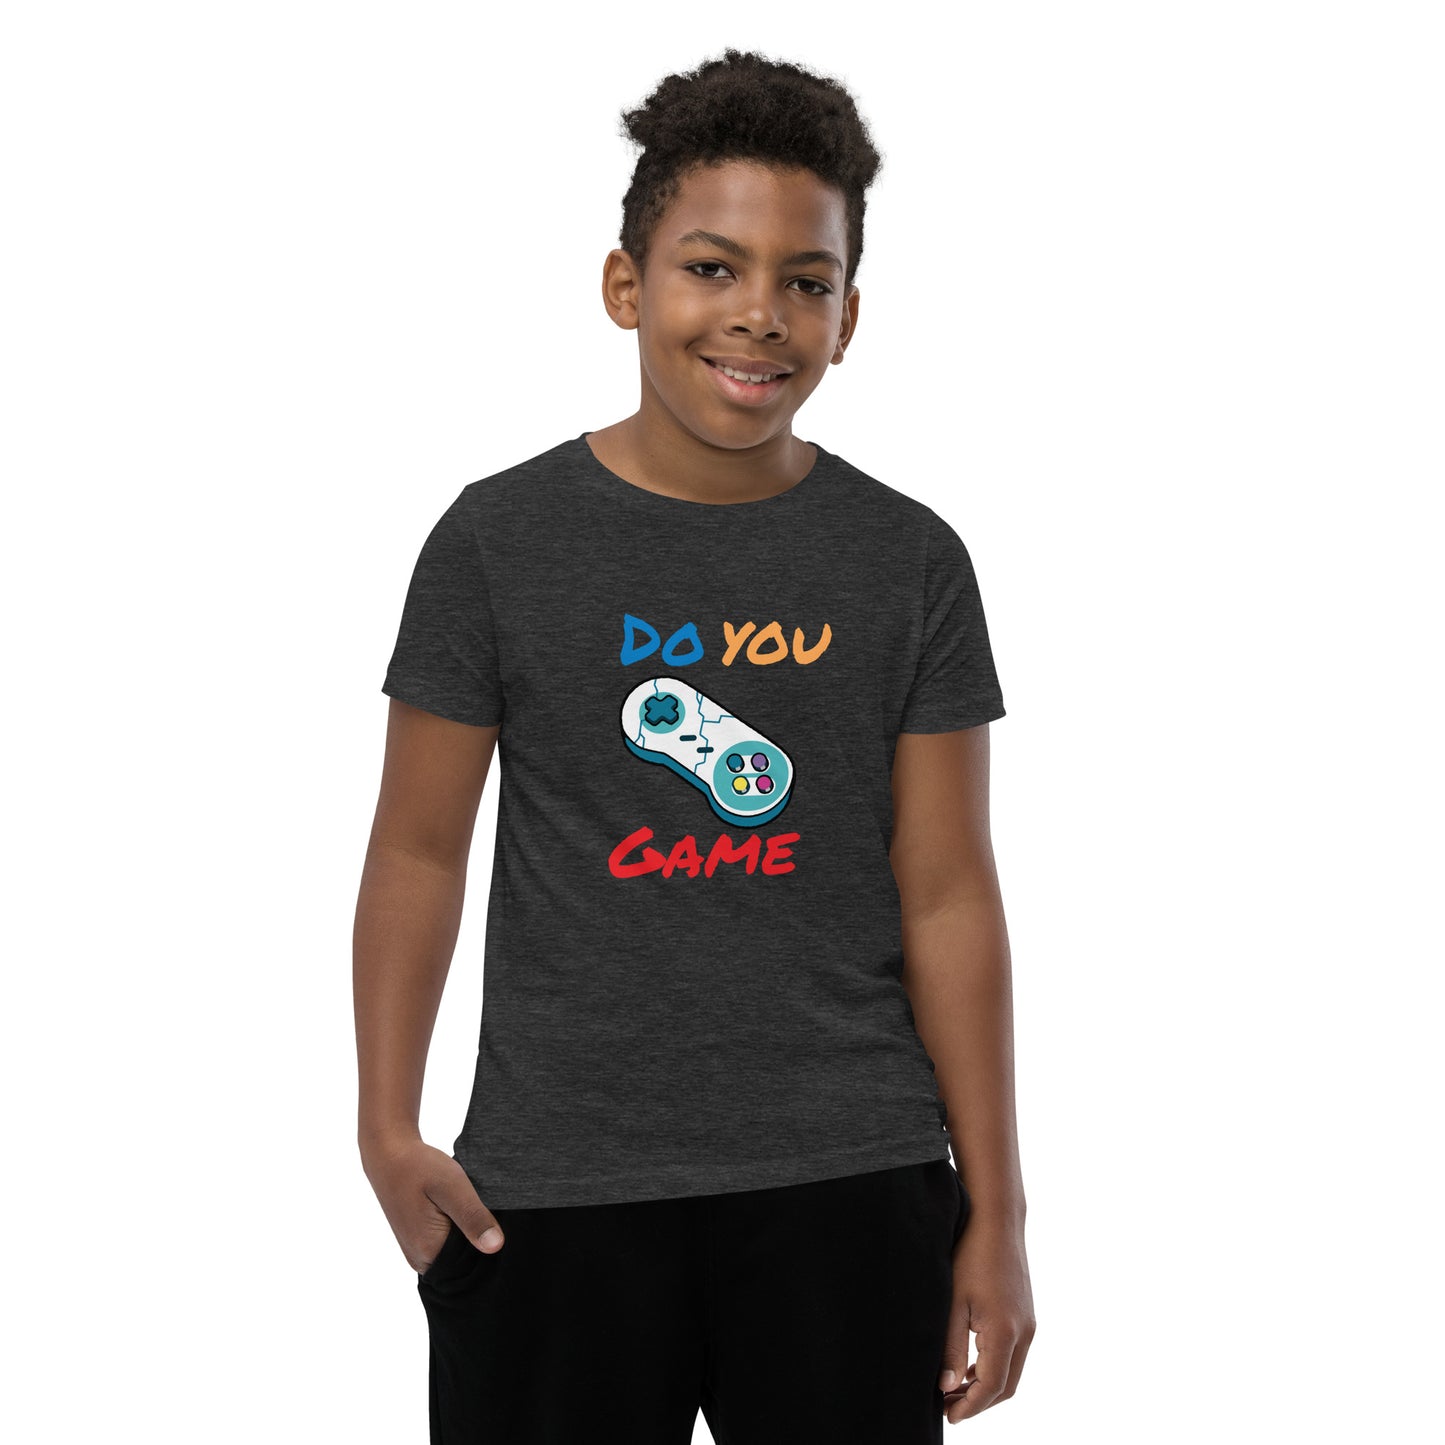 Do You Game Youth Short Sleeve T-Shirt